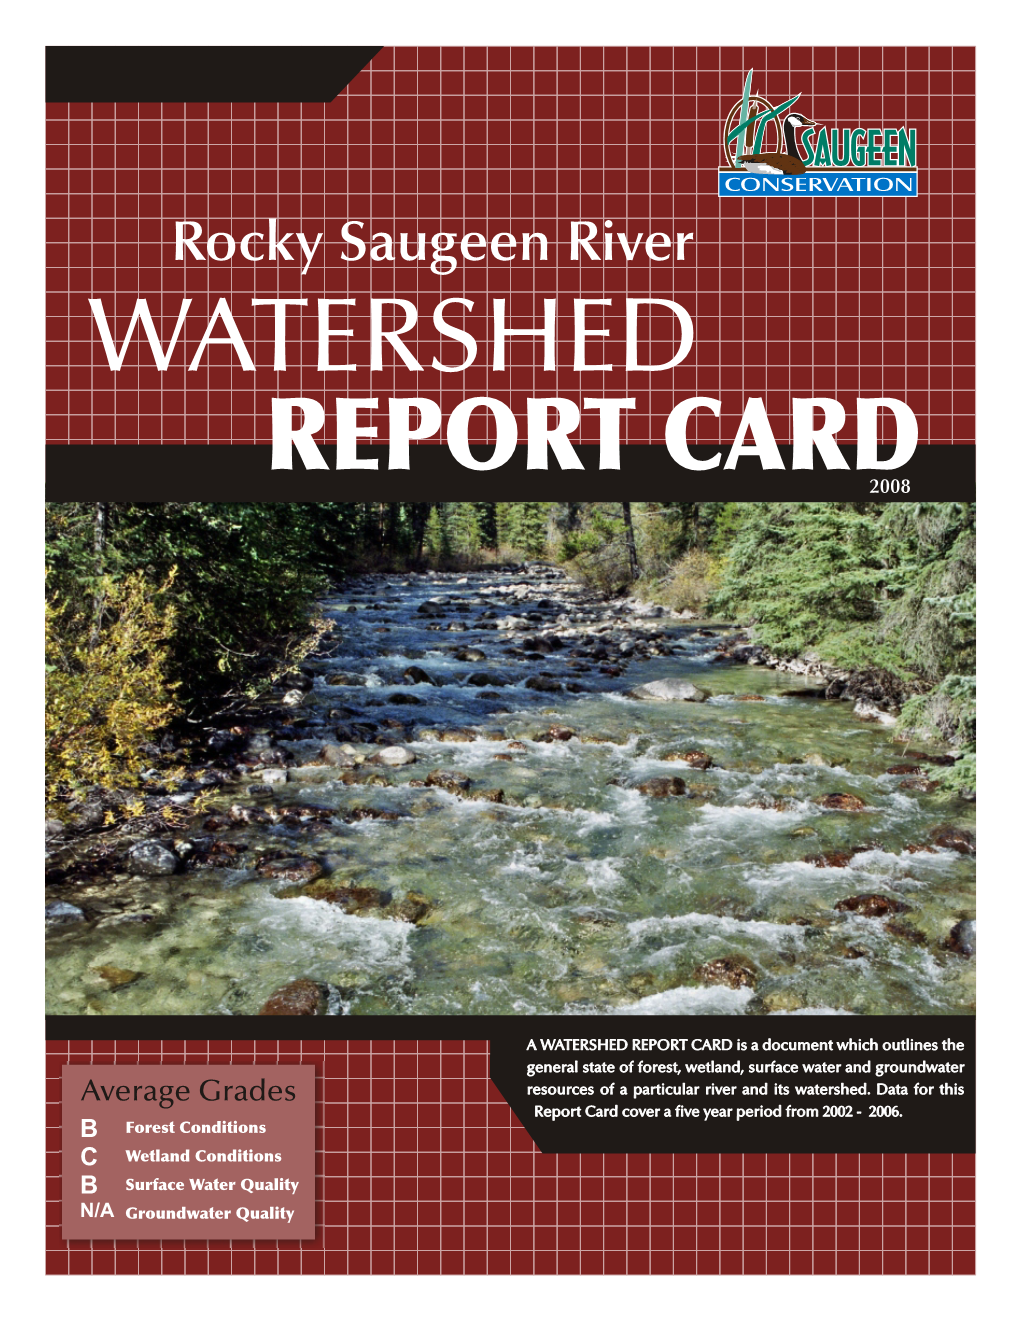 Rocky Saugeen River WATERSHED REPORT CARD 2008